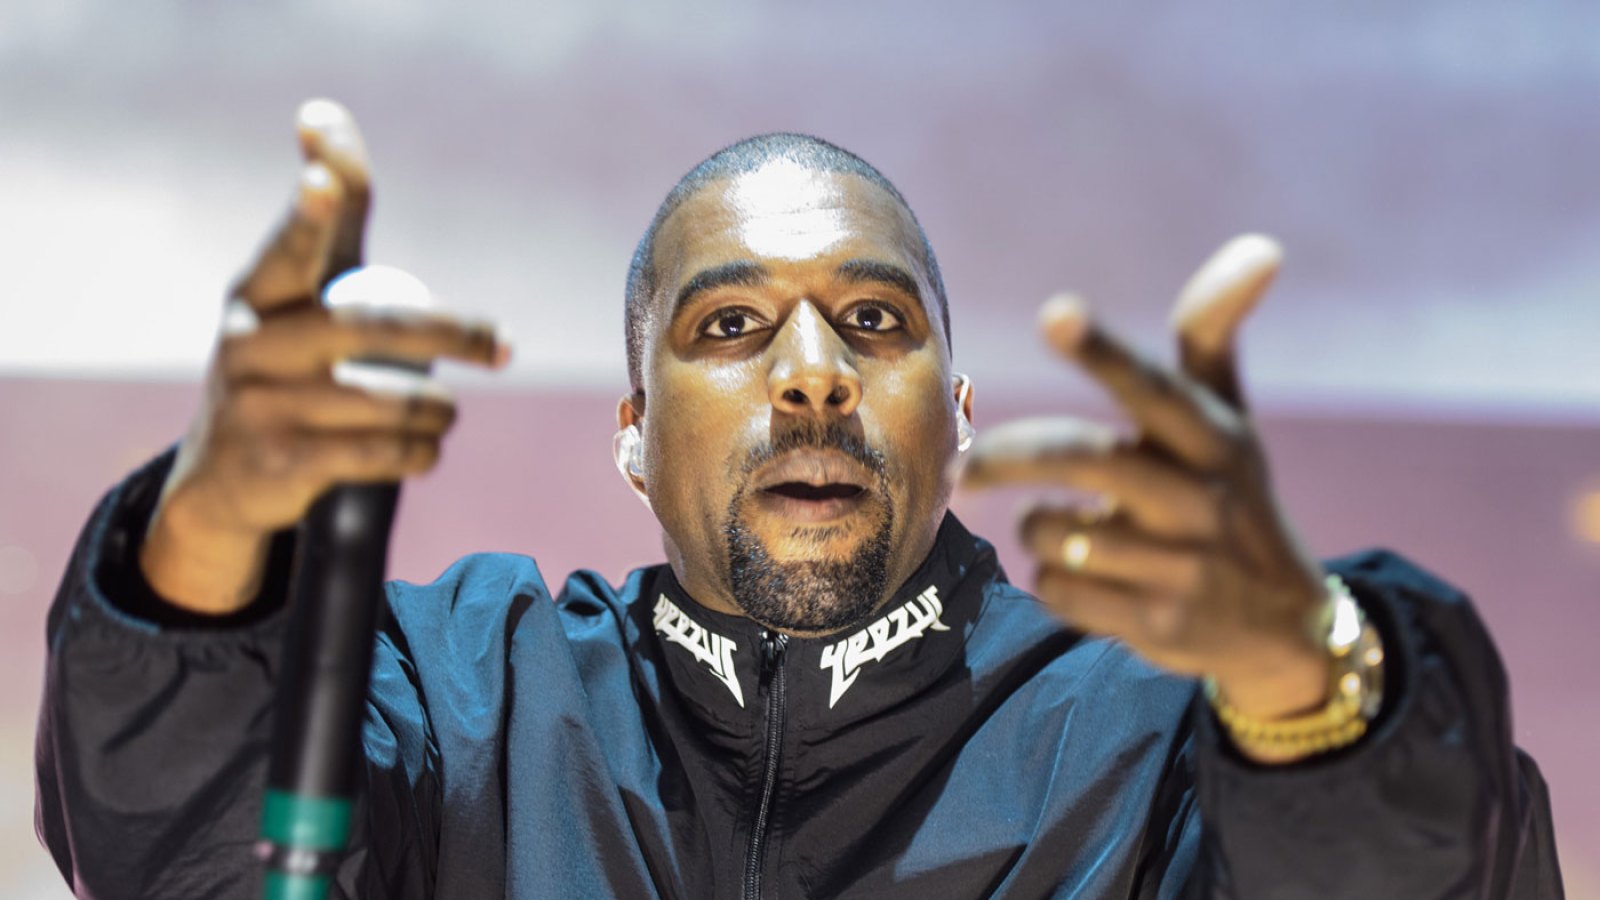 Kanye West nearly caused a riot in NYC when he tried to host a pop up show